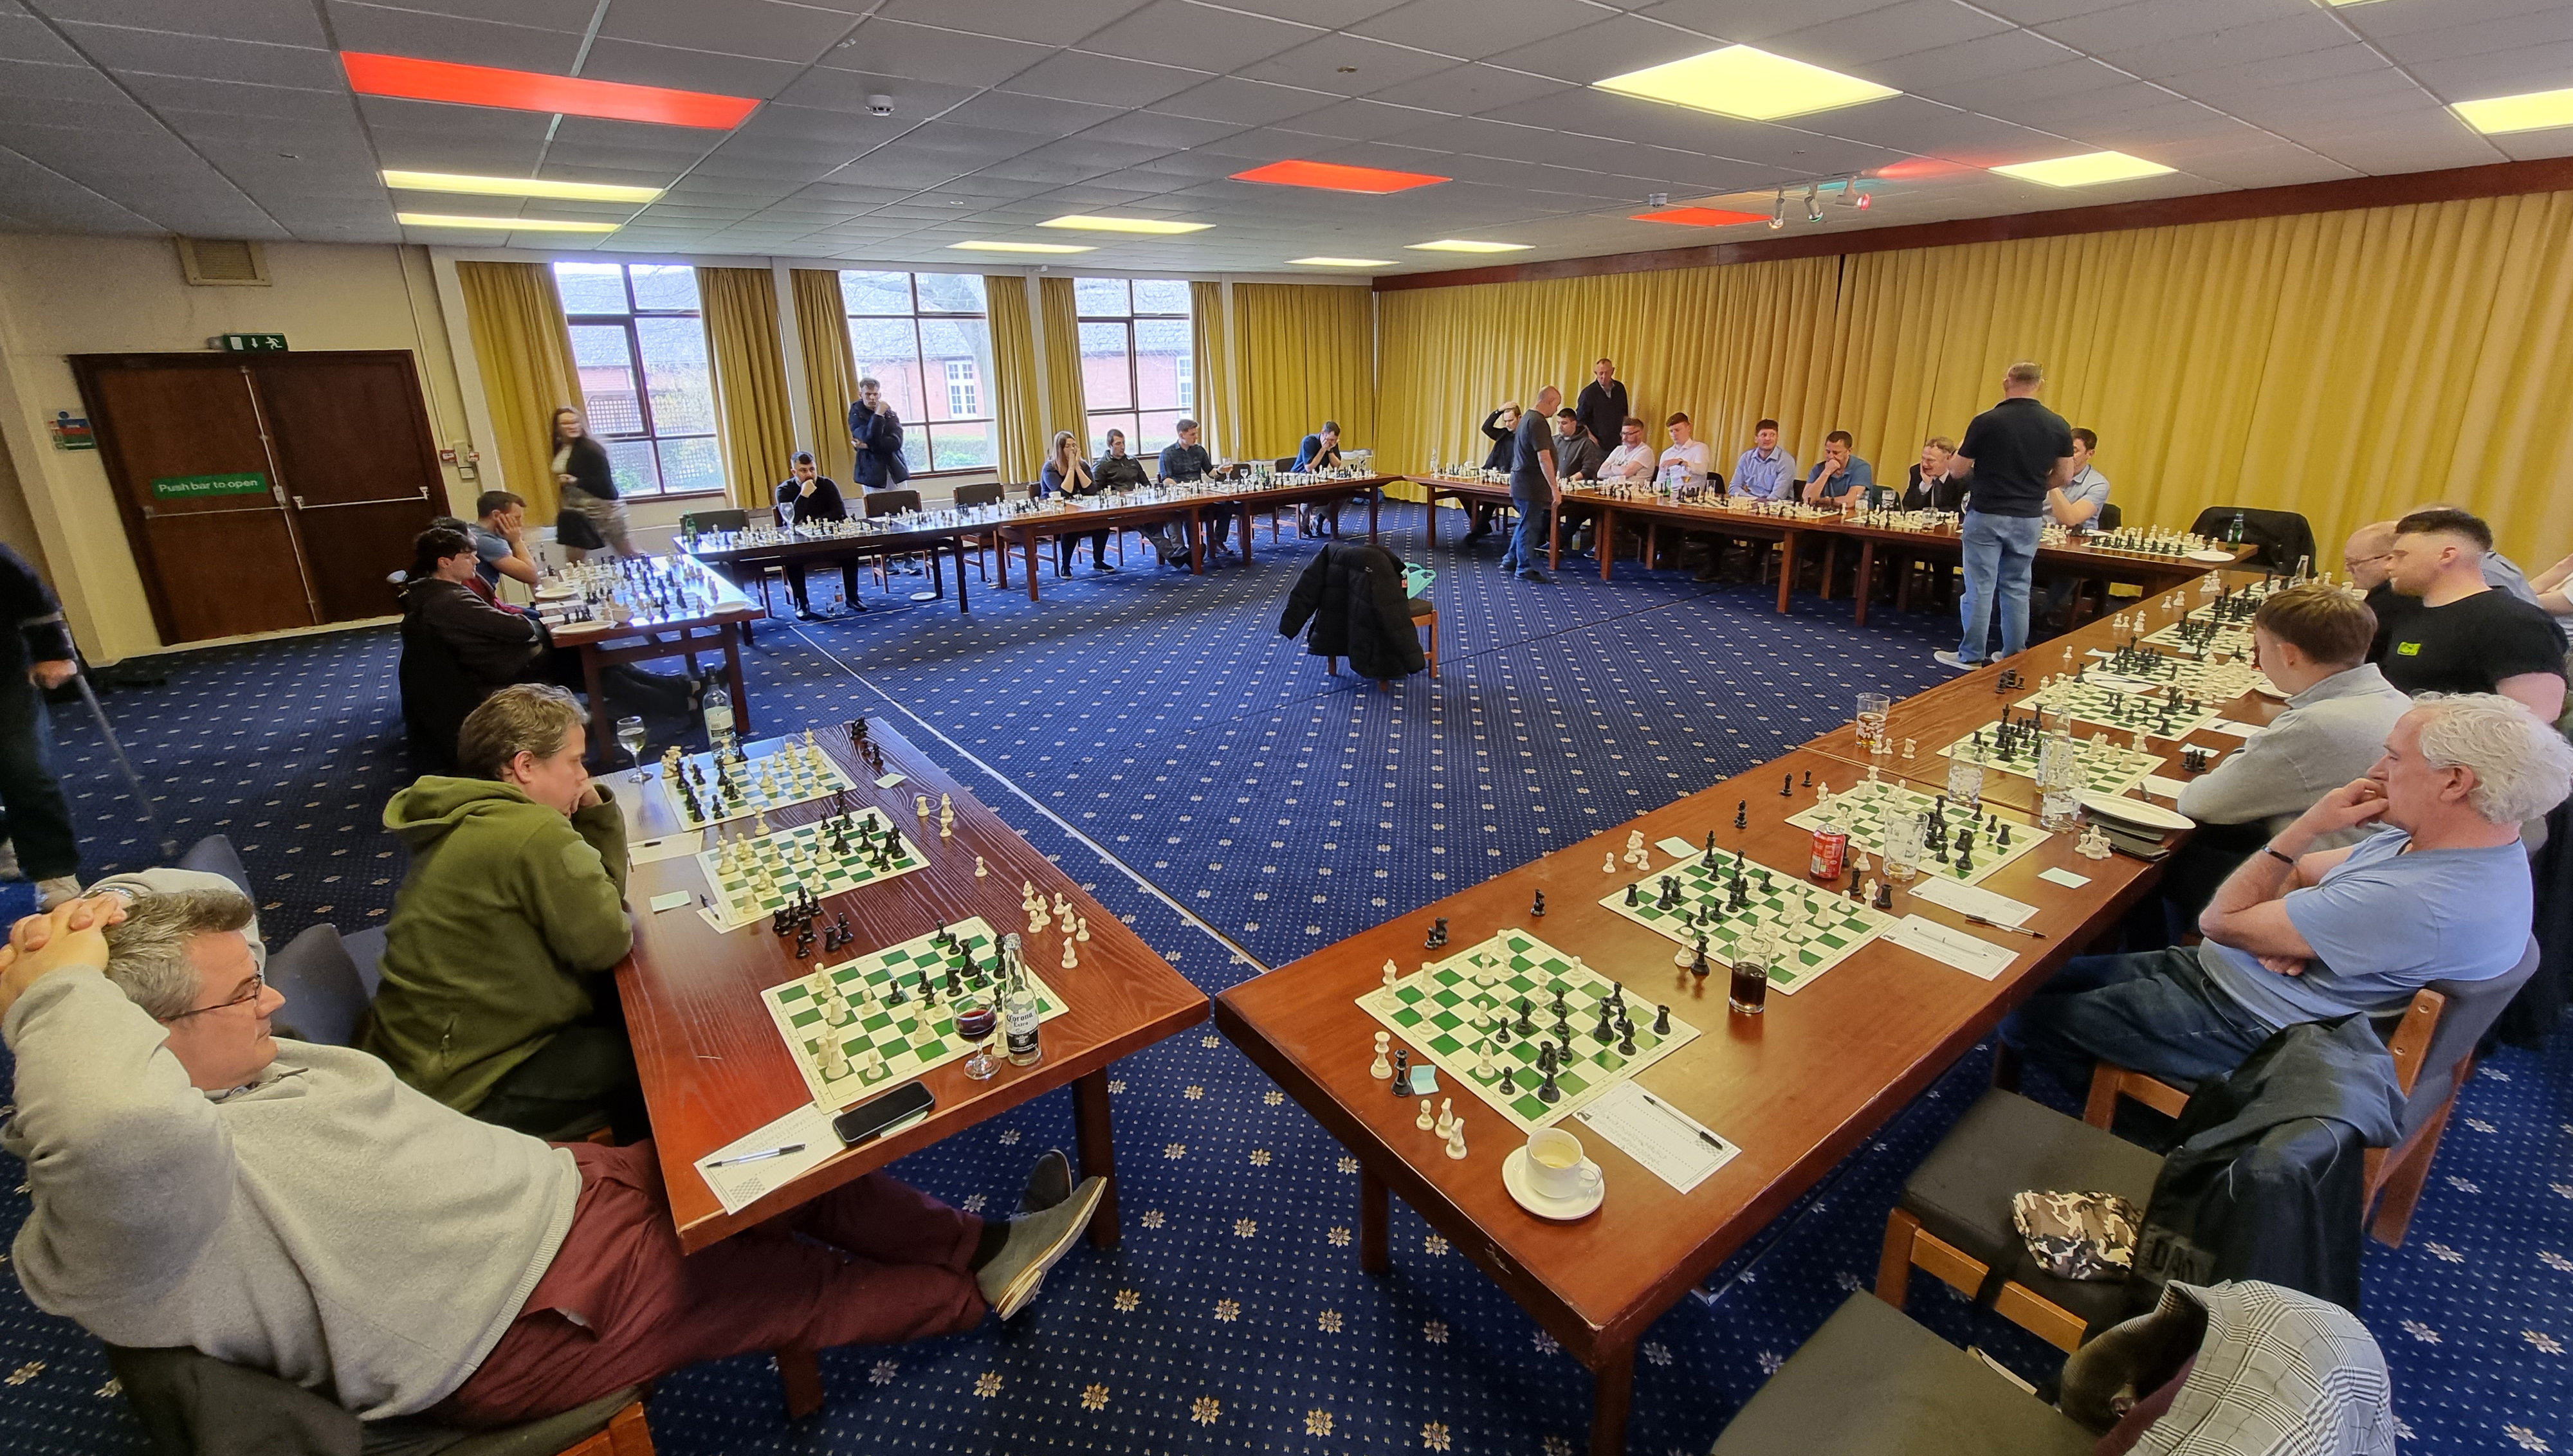 Chess Grandmaster Keith Arkell playing simultaneous matches at the Armed Forces Chess Championships